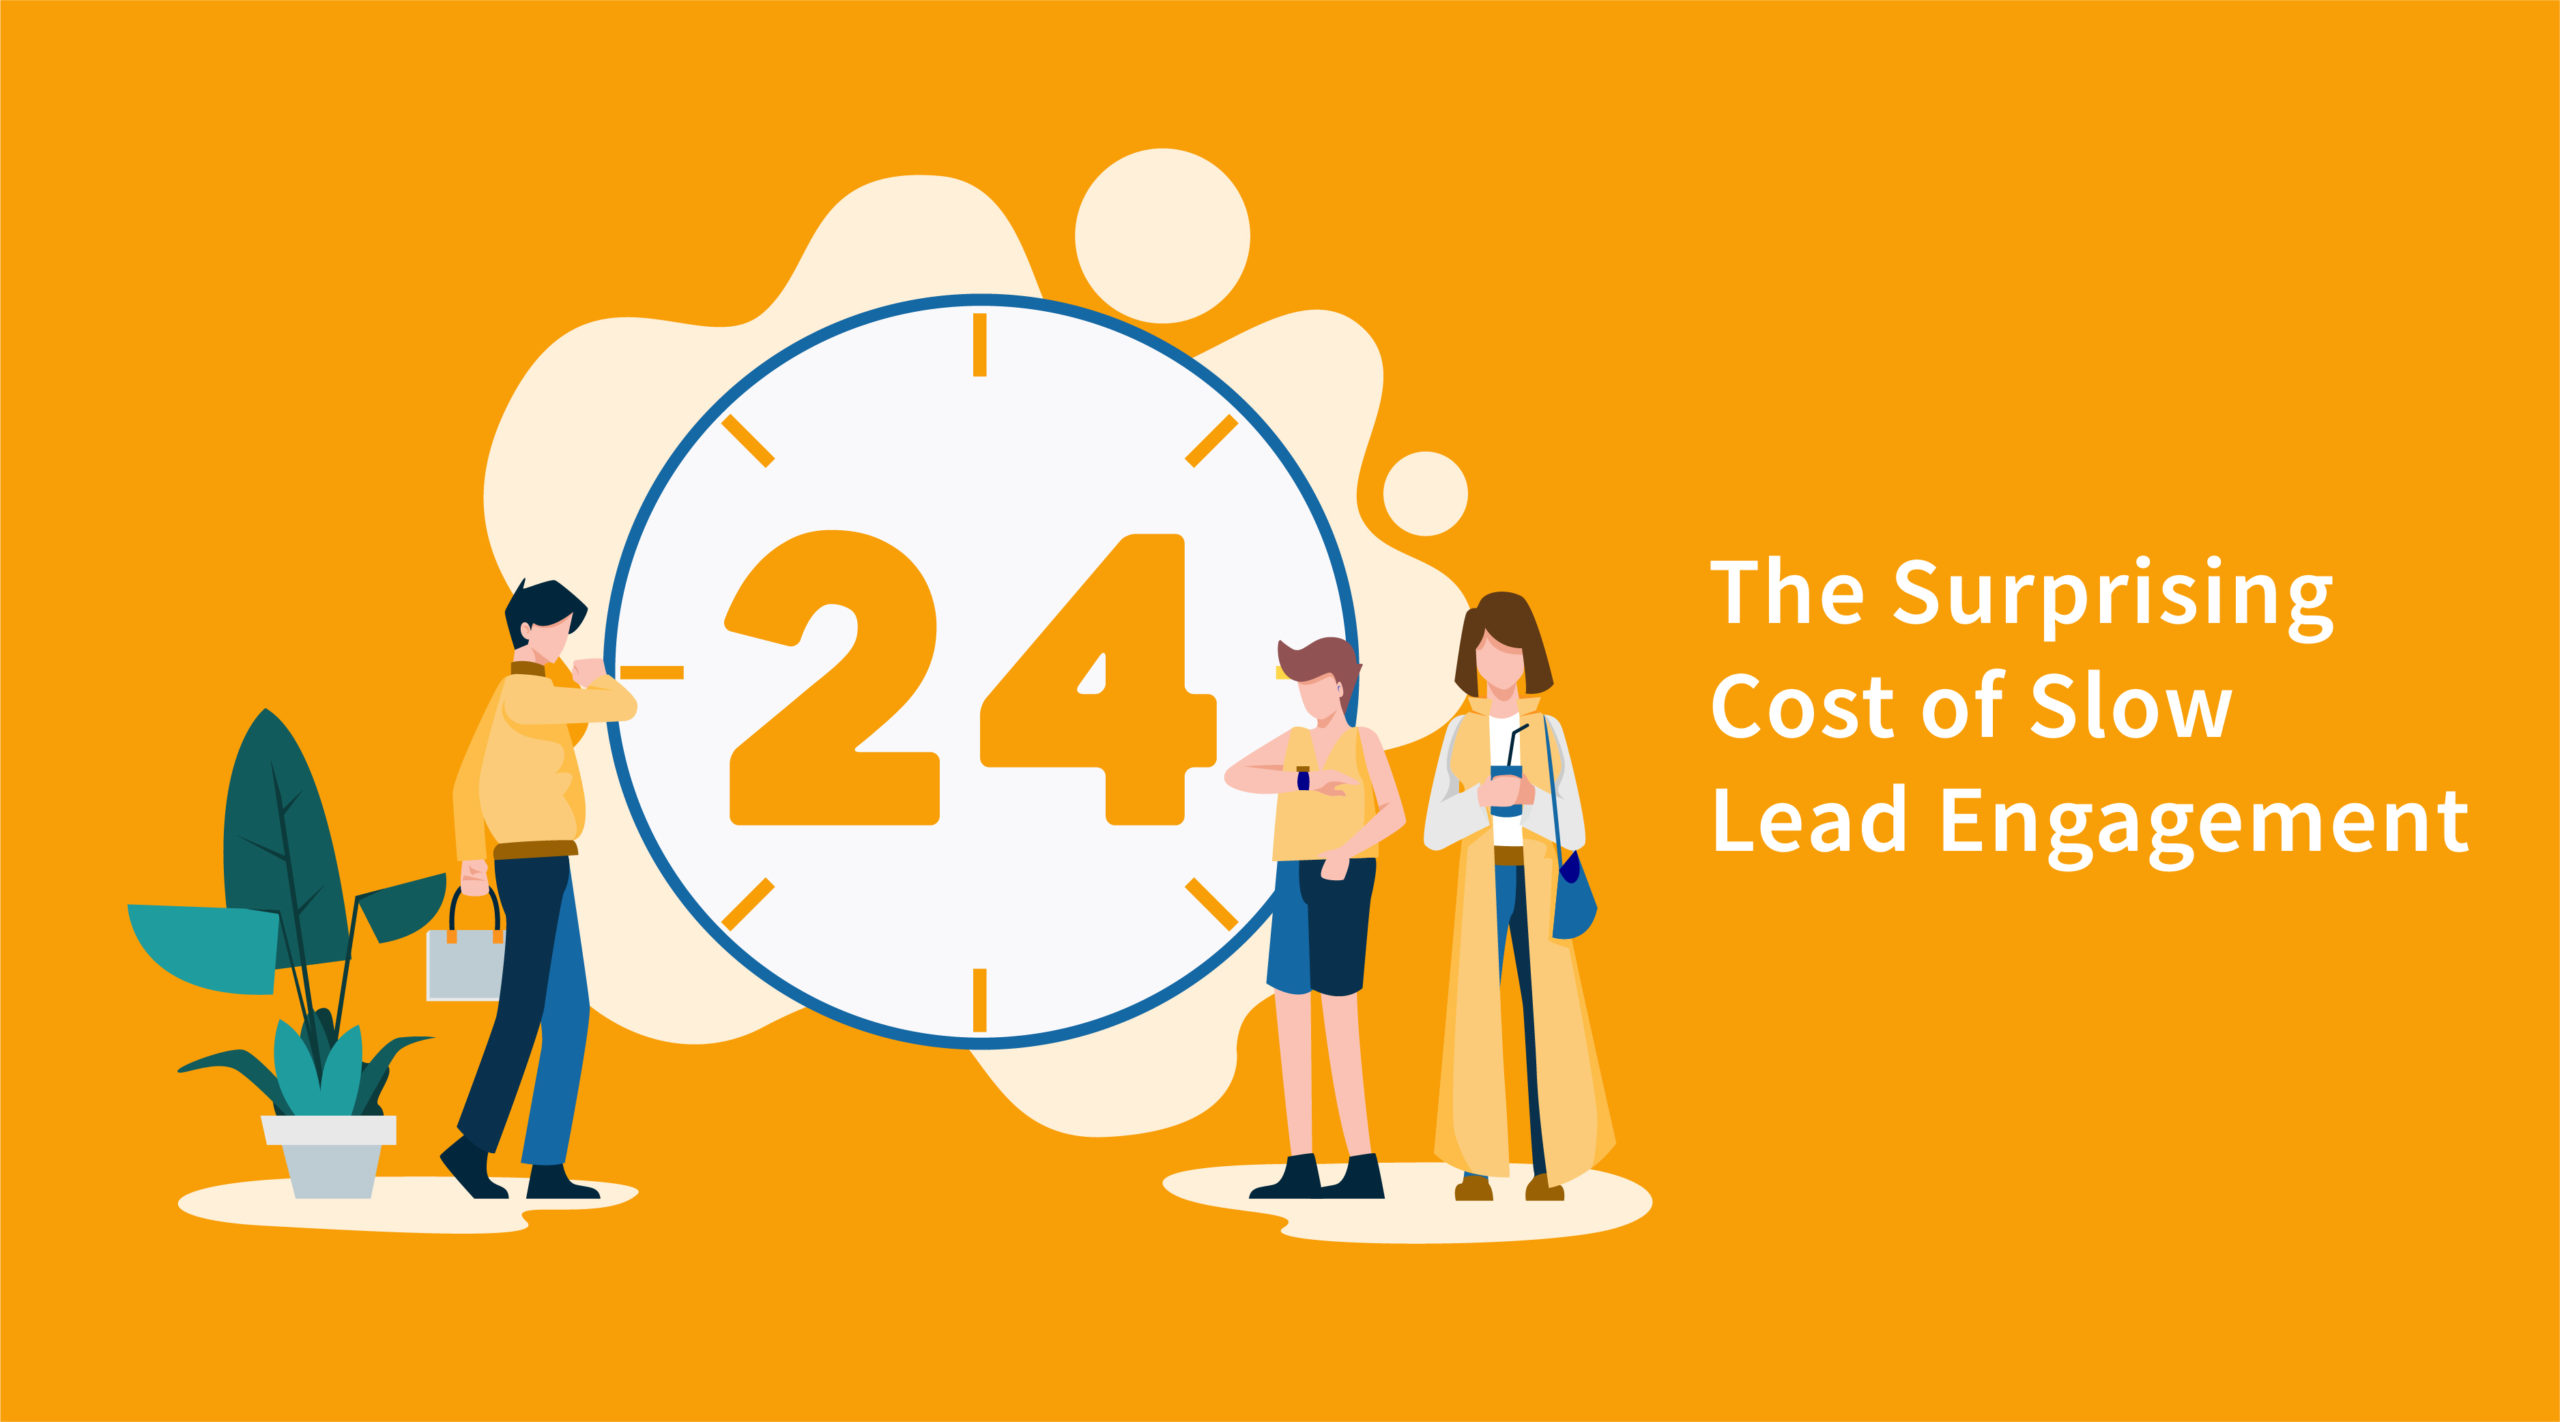 Lead Engagement, the Surprising Cost of Slow Response Featured Image